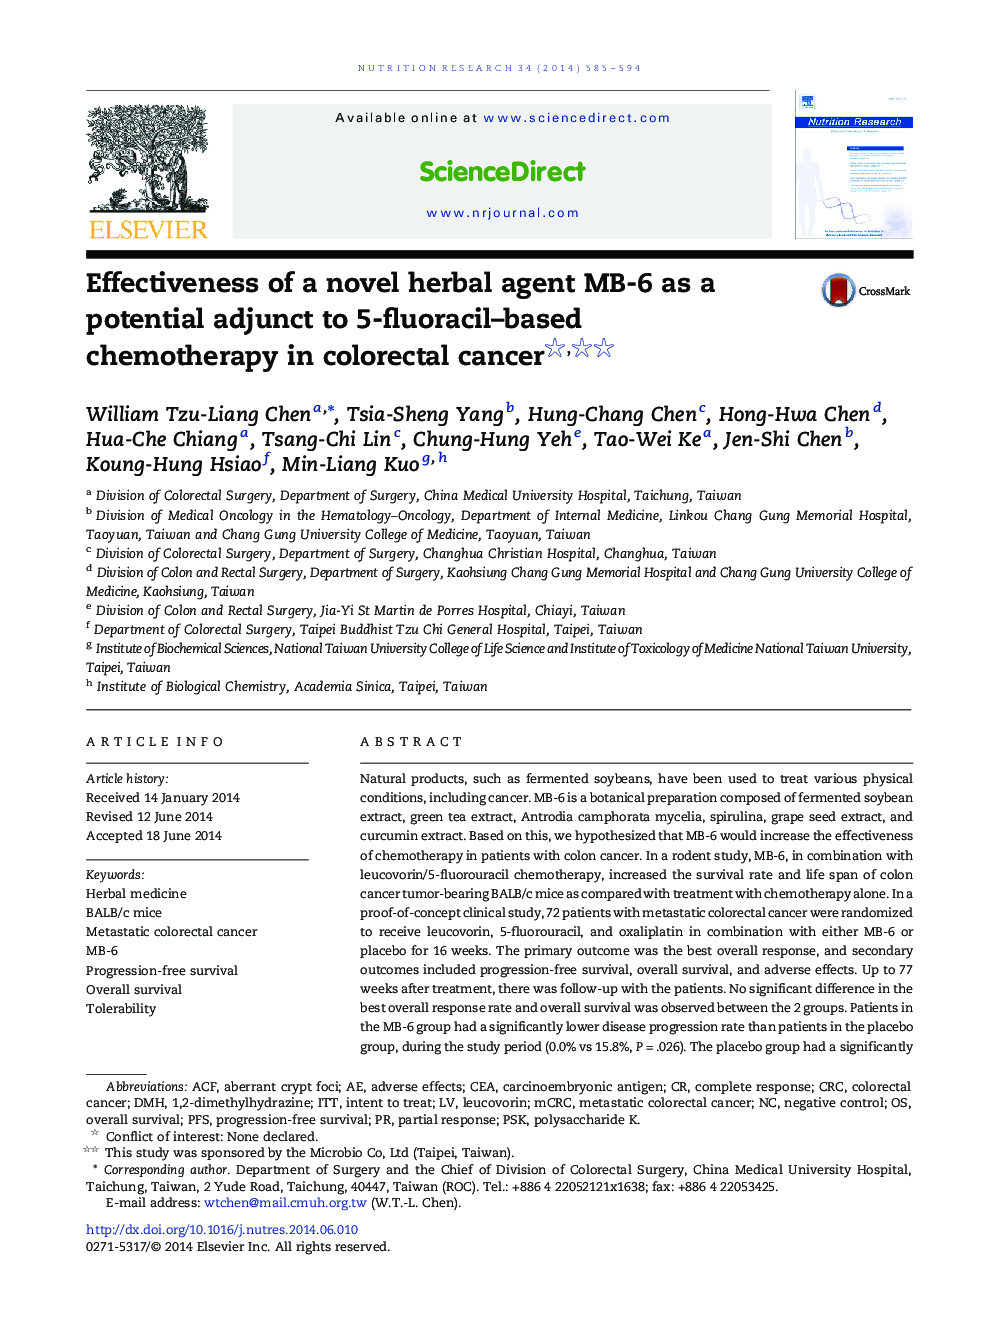 Effectiveness of a novel herbal agent MB-6 as a potential adjunct to 5-fluoracil–based chemotherapy in colorectal cancer 